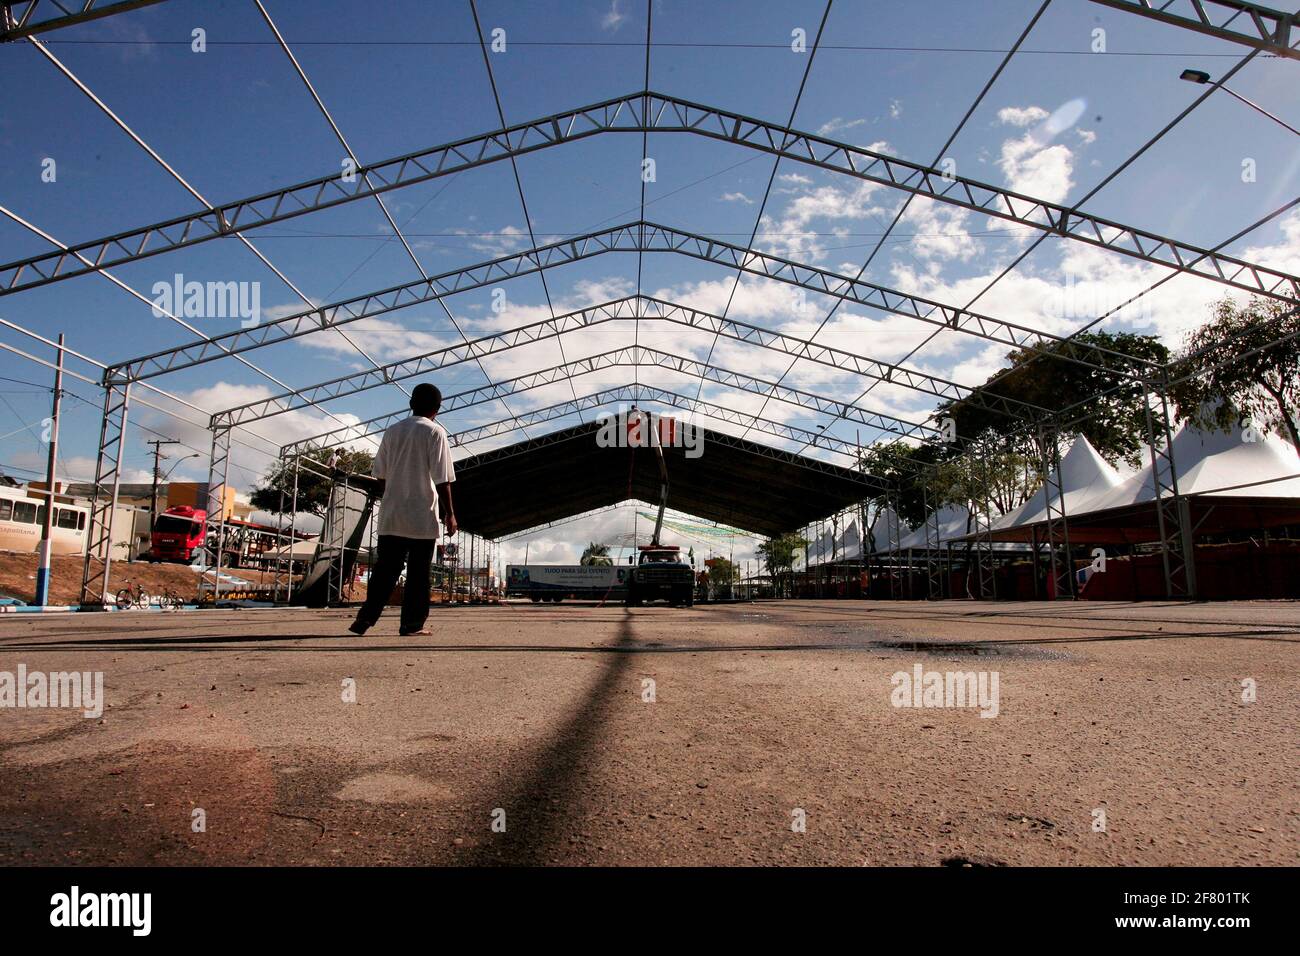 eunapolis, bahia / brazil - june 28, 2010: workers are seen setting up a structure for the festivities in honor of Sao Pedro in the city of Eunapolis. Stock Photo